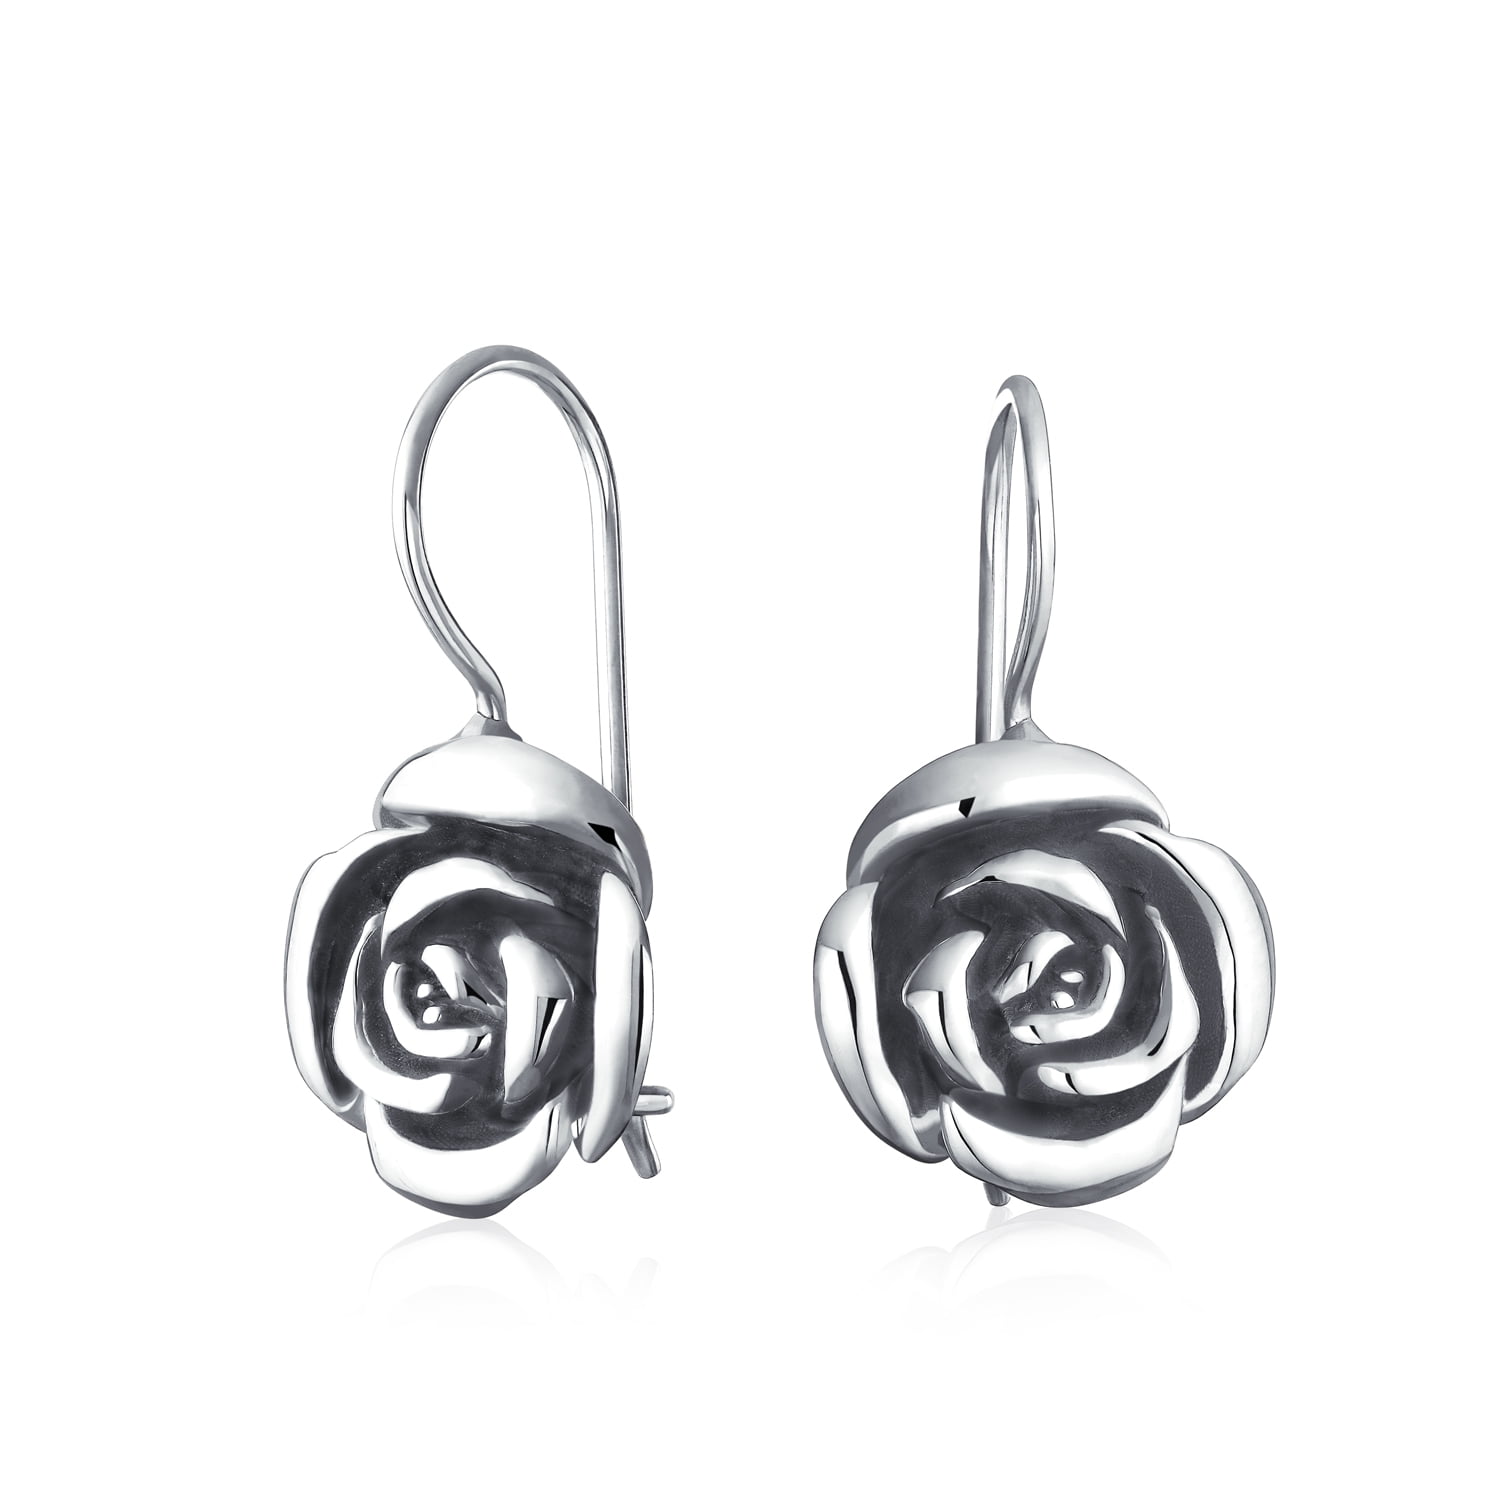 Black Rose Stud Earrings Sterling Silver 925 Floral Style Jewelry Gift 8 mm 